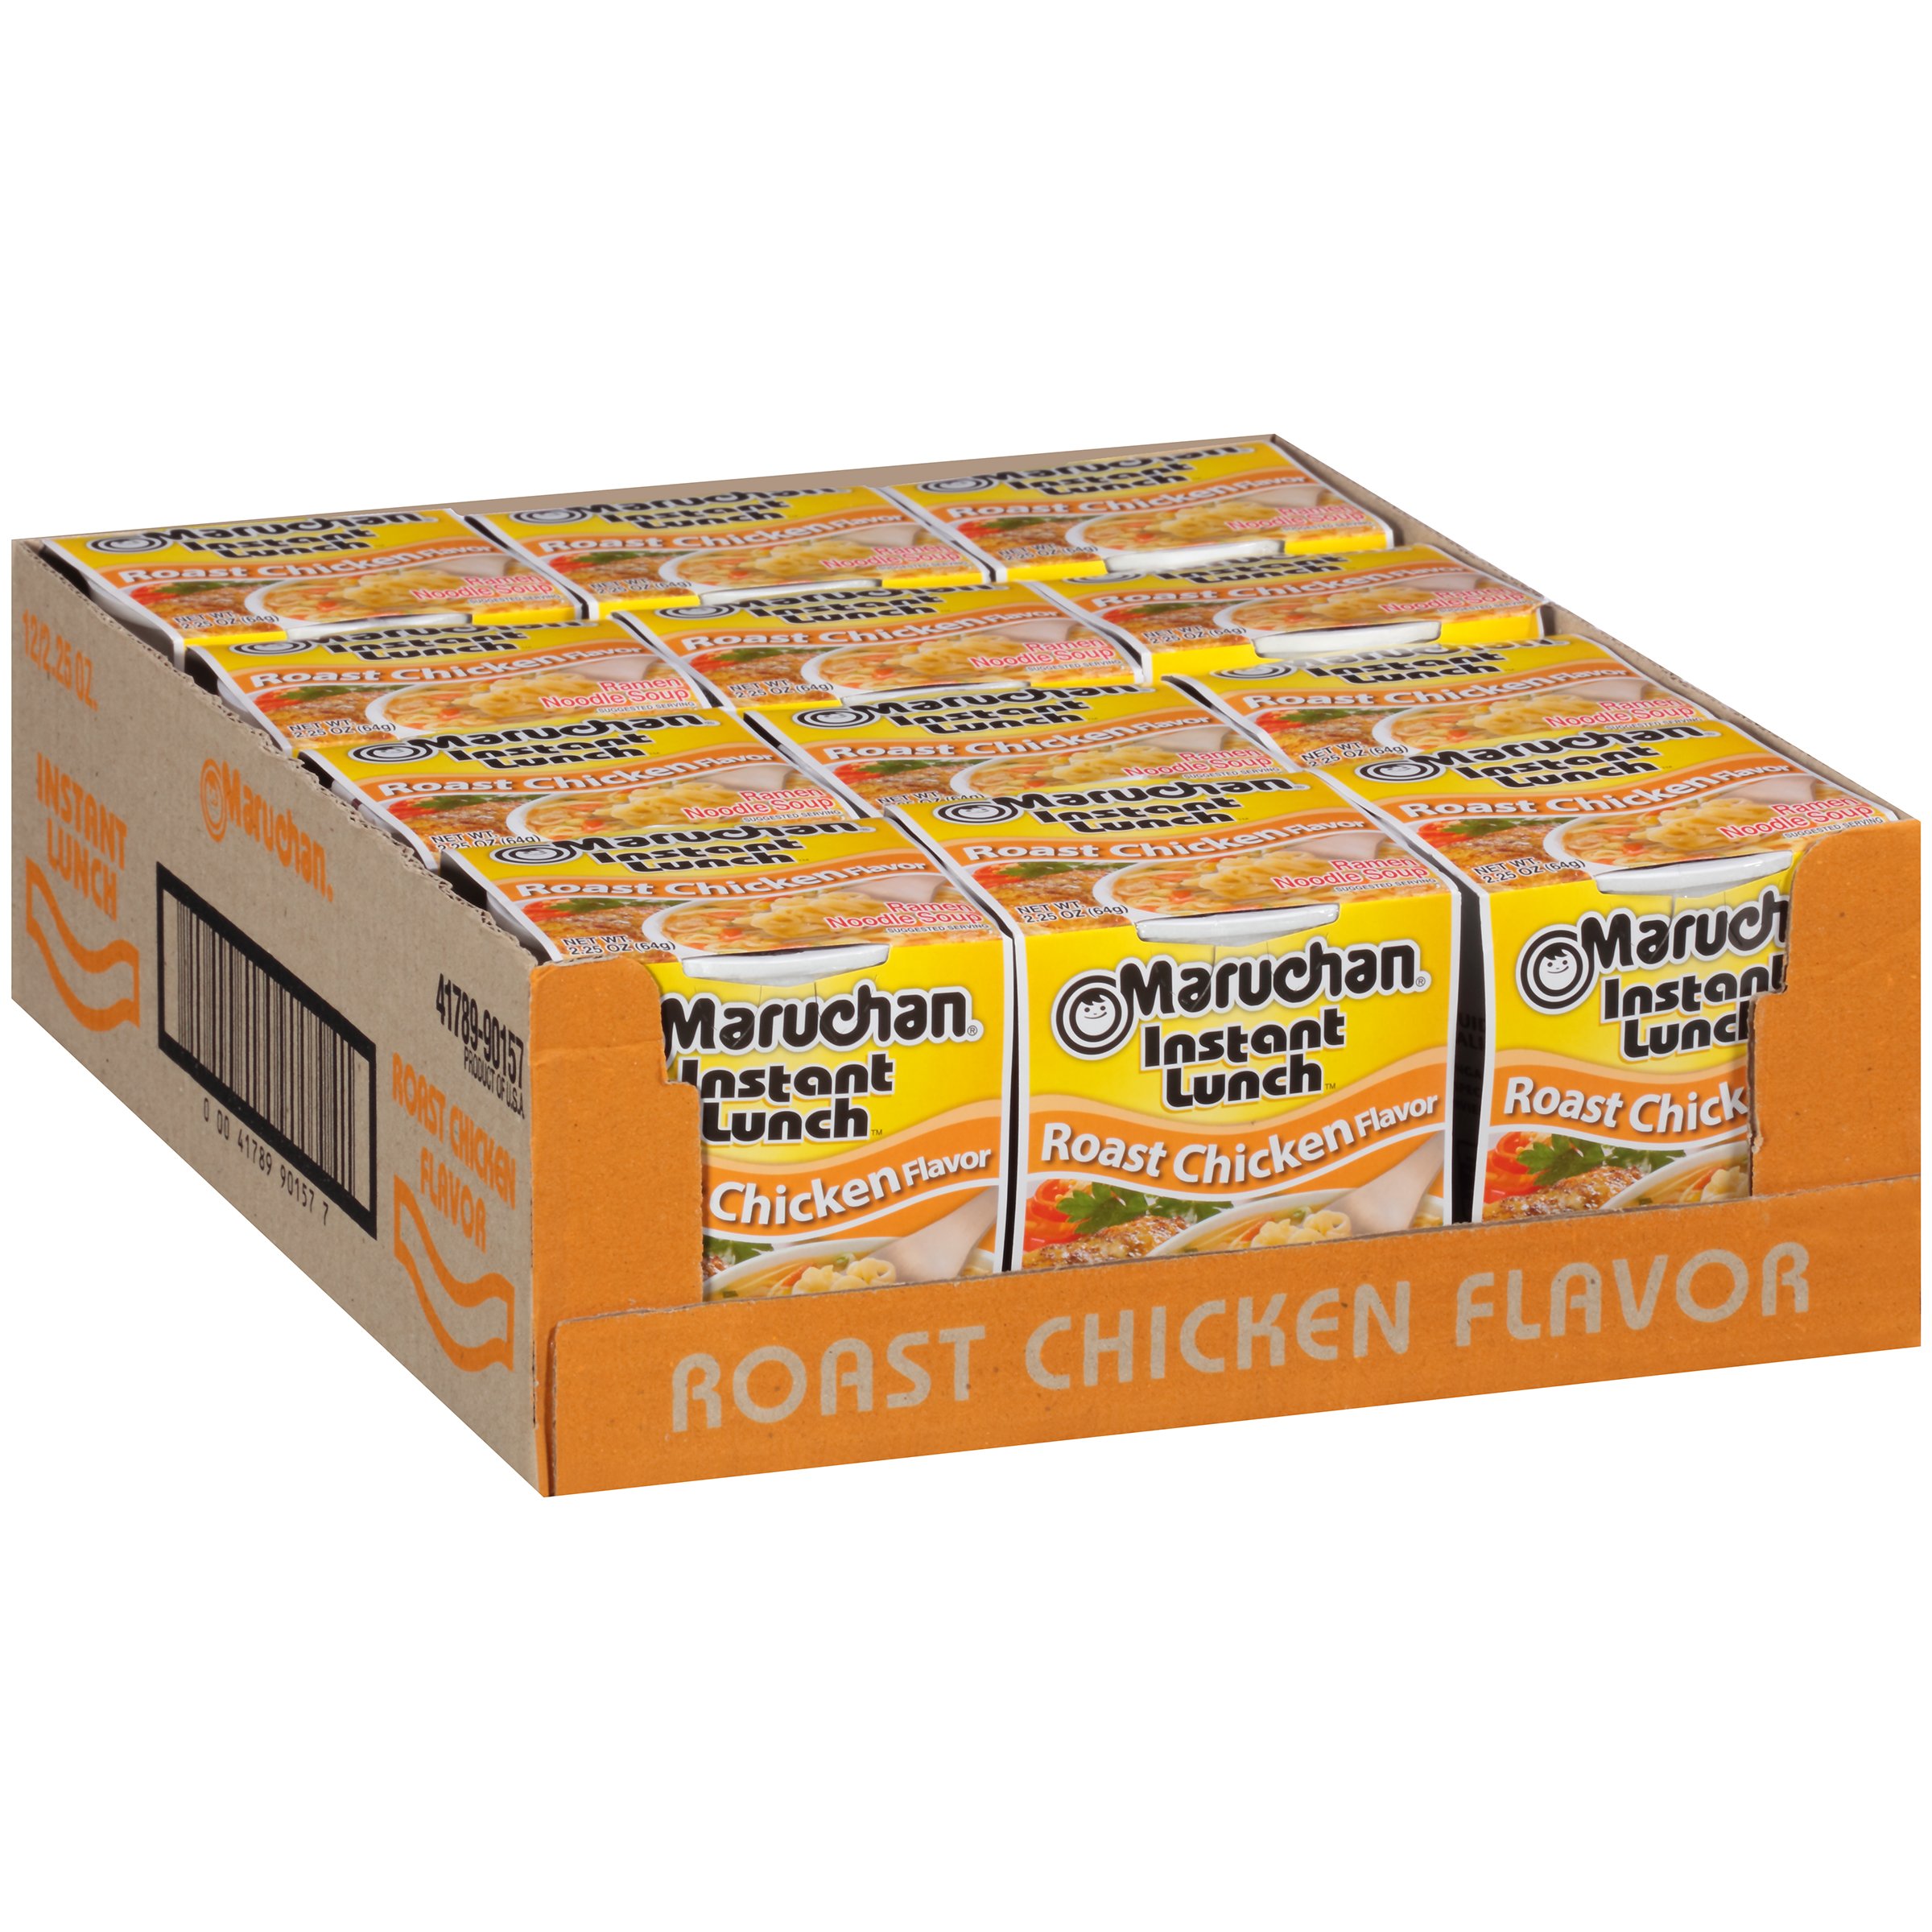 12-Pack 2.25-oz. Maruchan Instant Lunch Ramen Noodle Cups (Roasted Chicken) $3.74 with S&S 40% off coupon